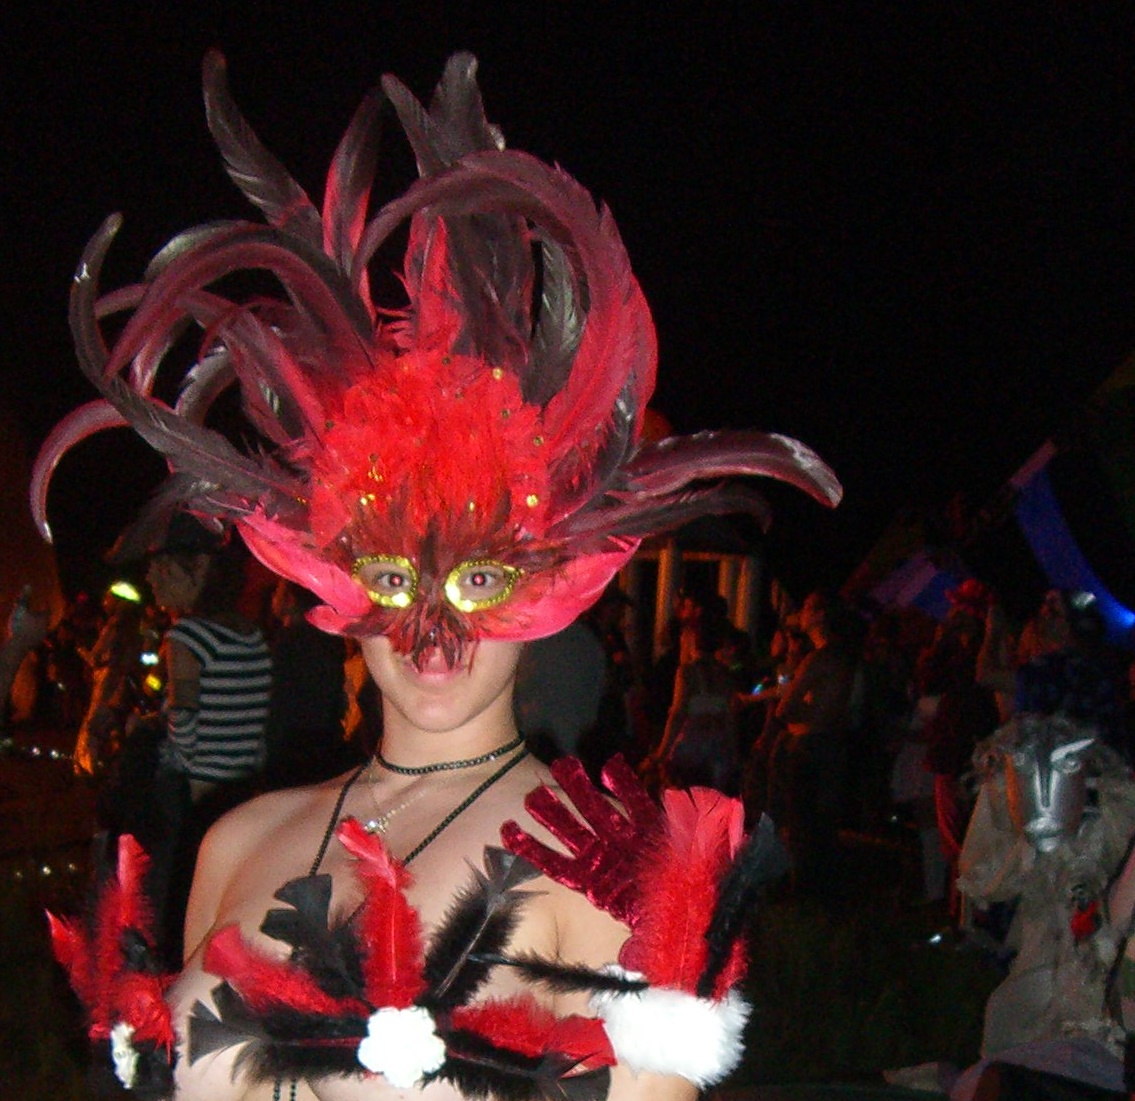 A person in a headdress and mask of red feathers